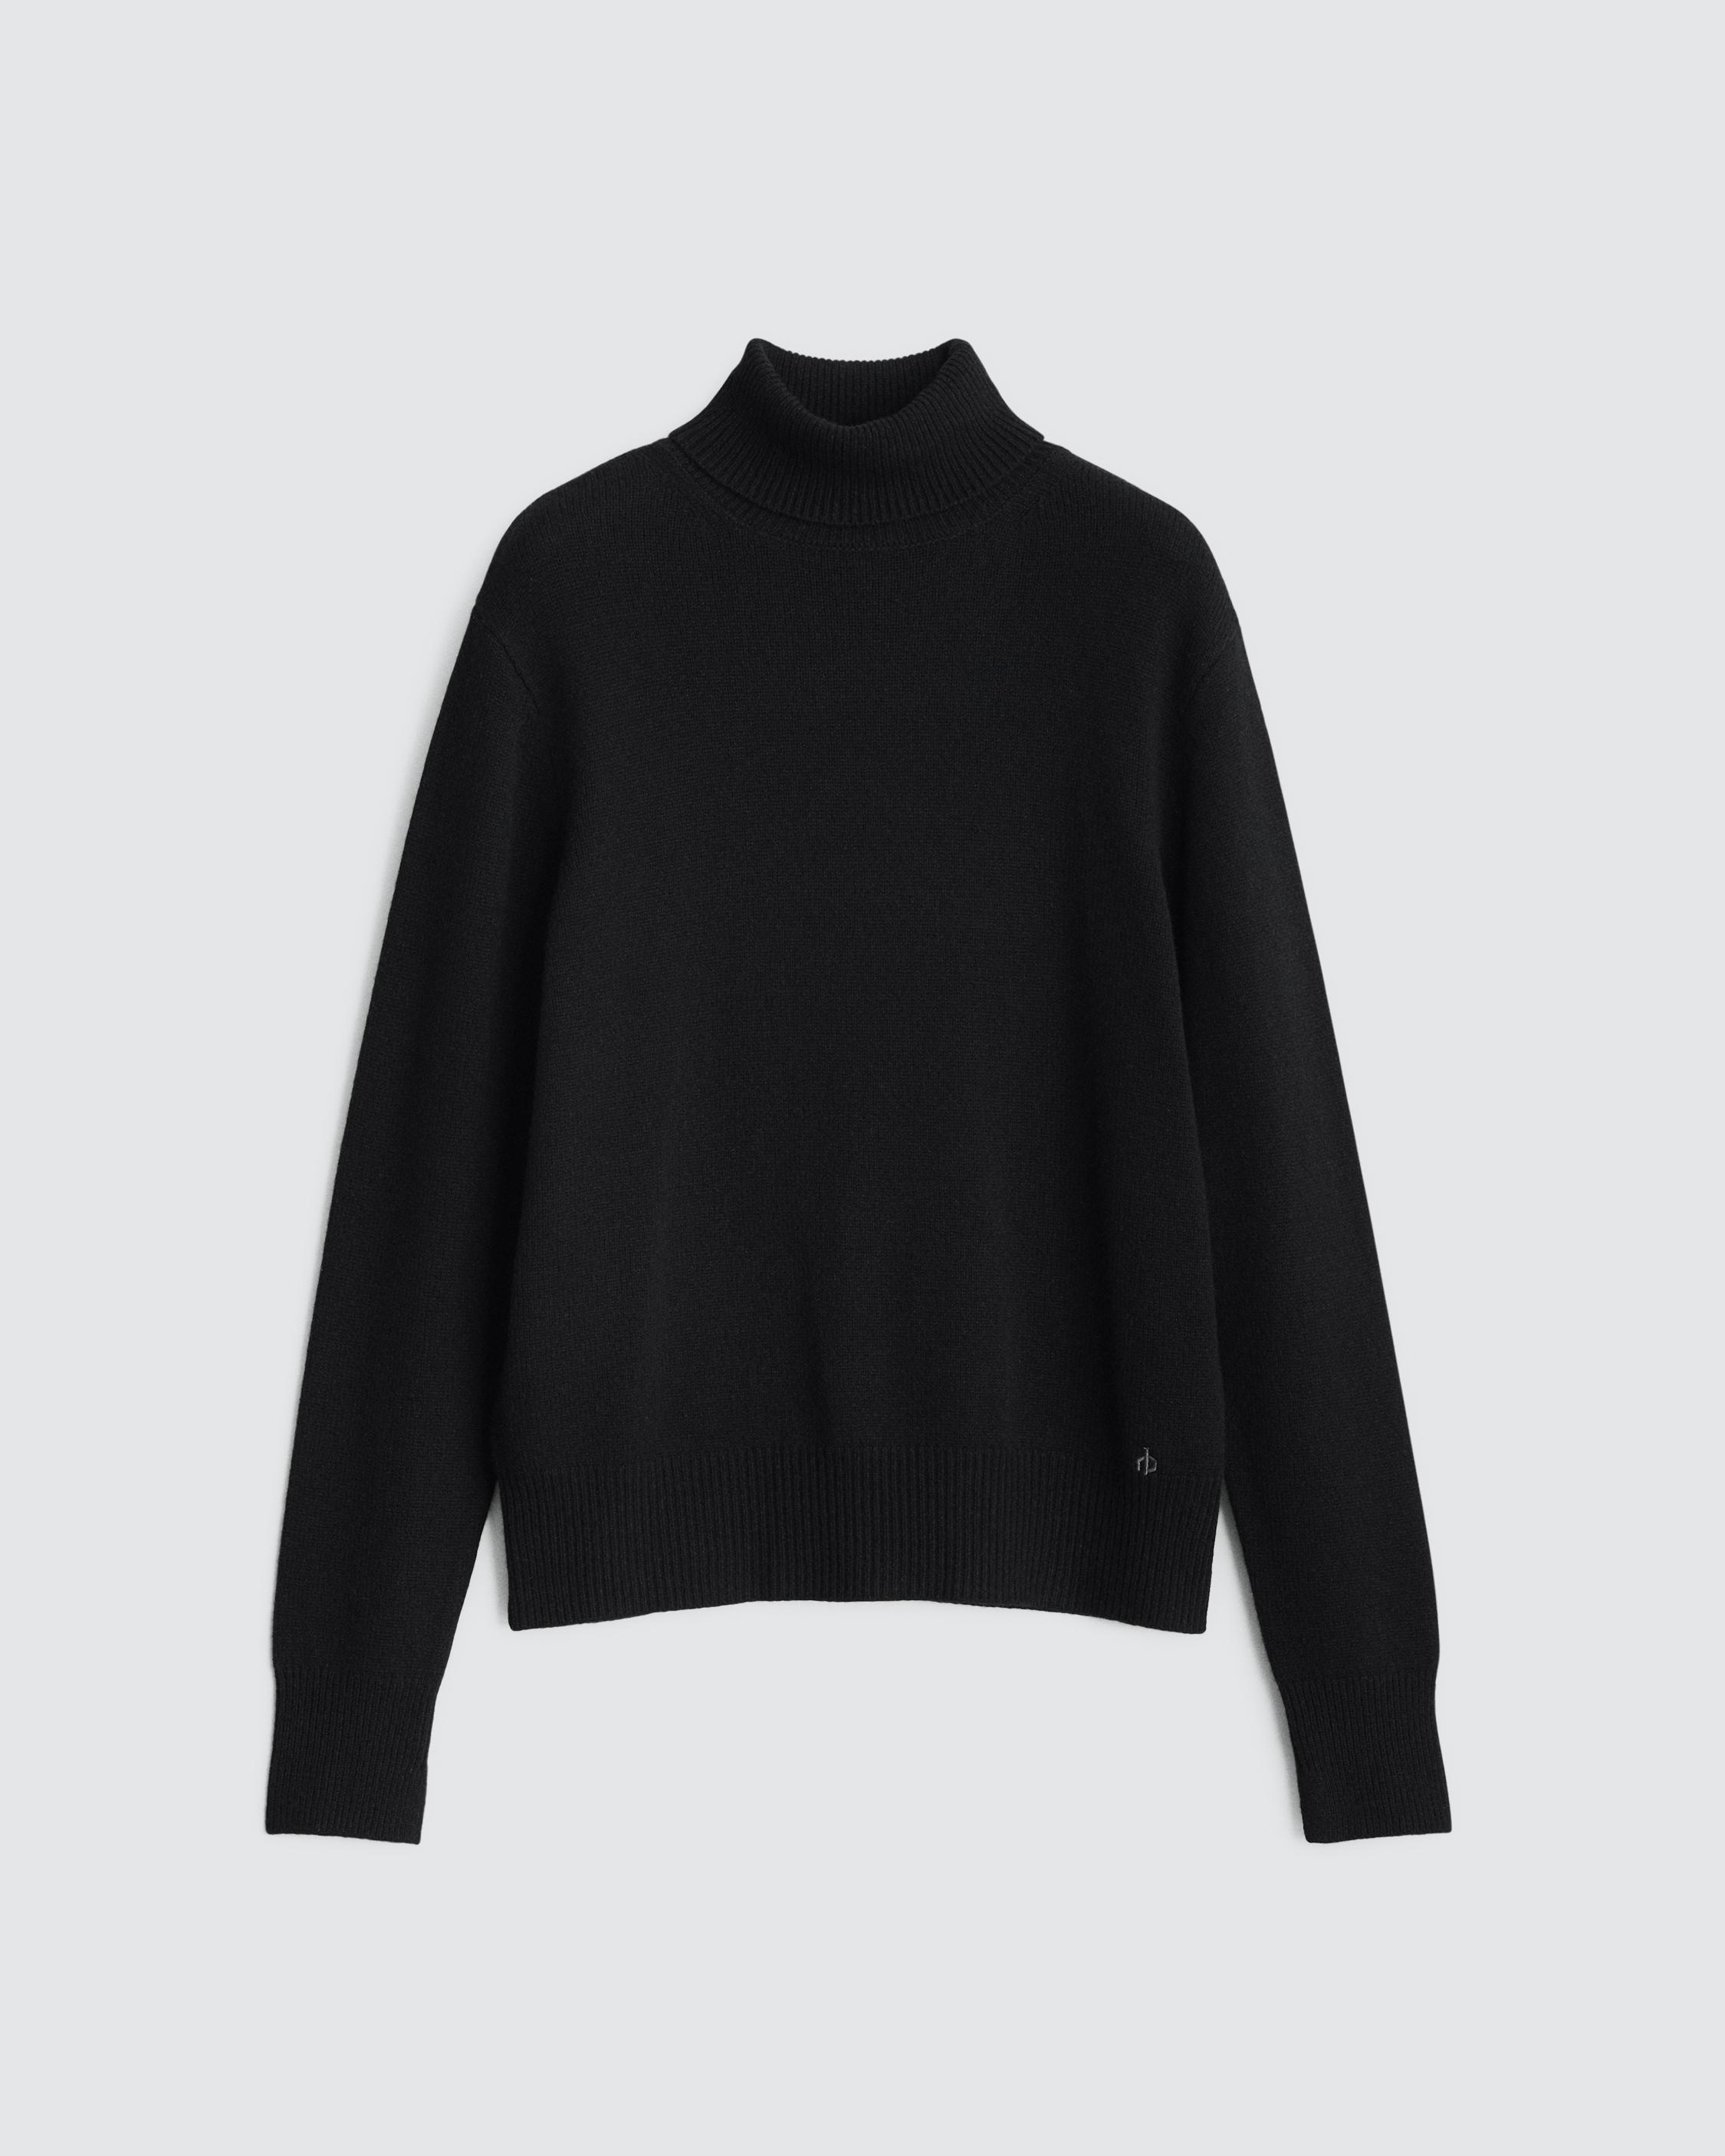 Talan Cashmere Turtleneck
Relaxed Fit - 1